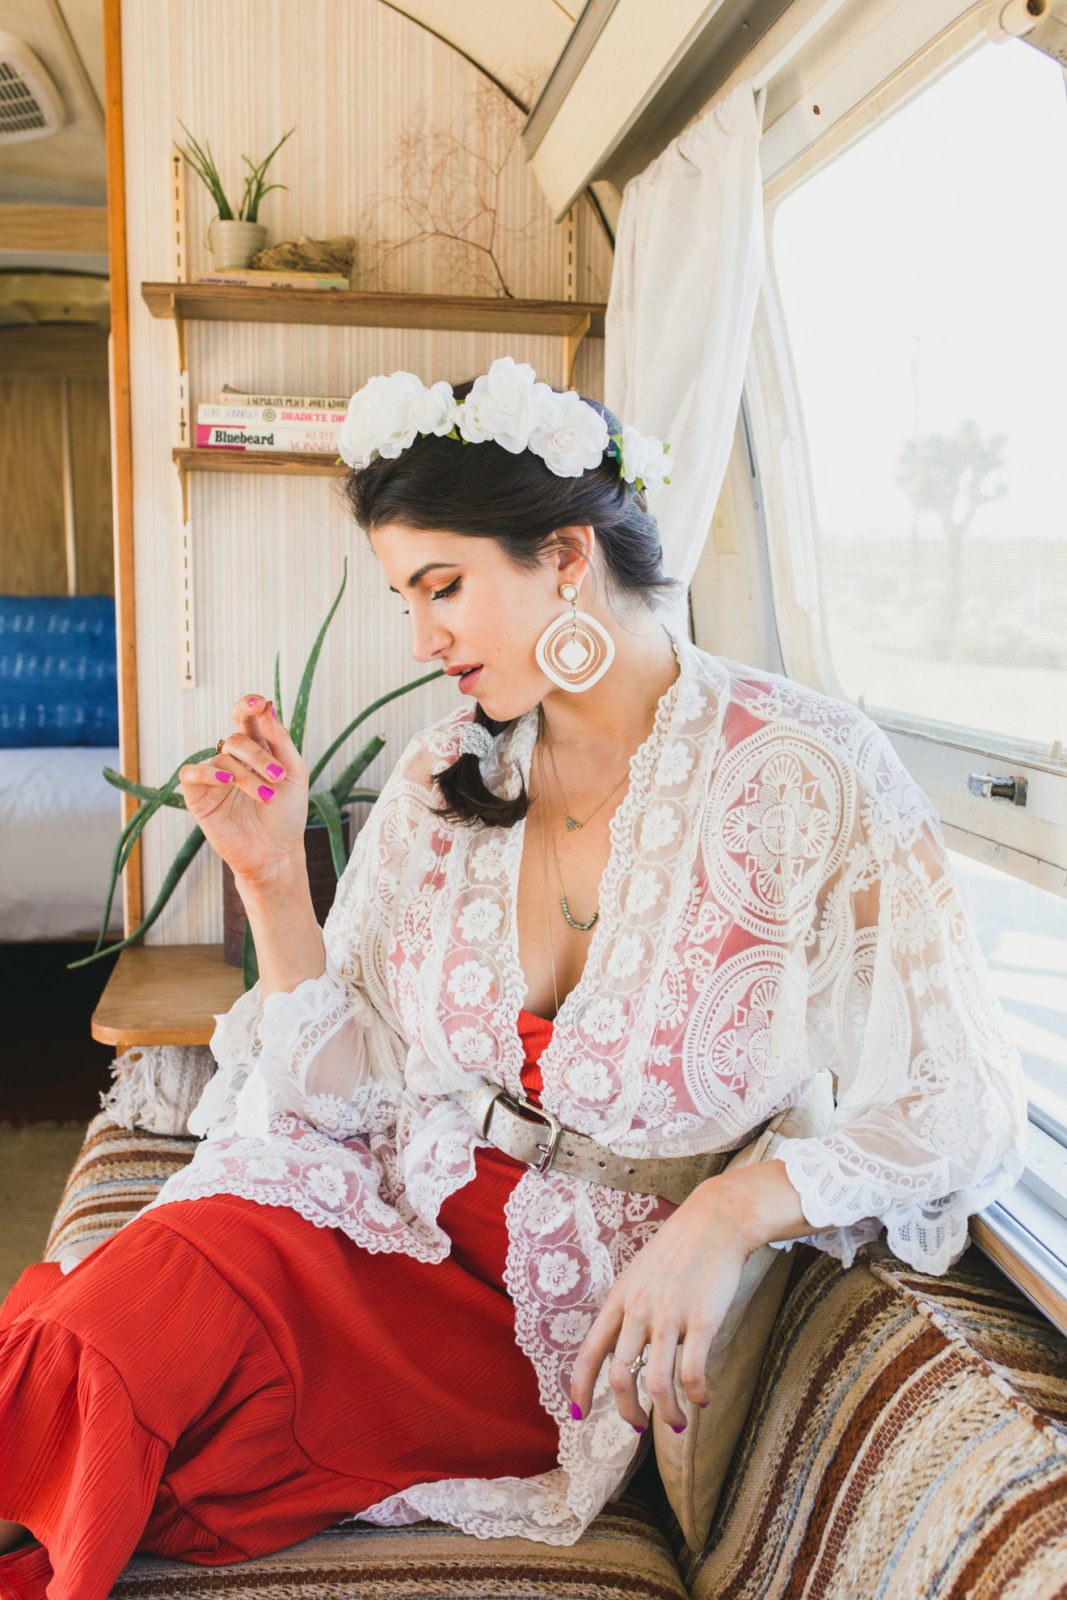 Coachella Outfit Ideas No. & Hair Accessories by popular Los Angeles fashion blogger Laura Lily